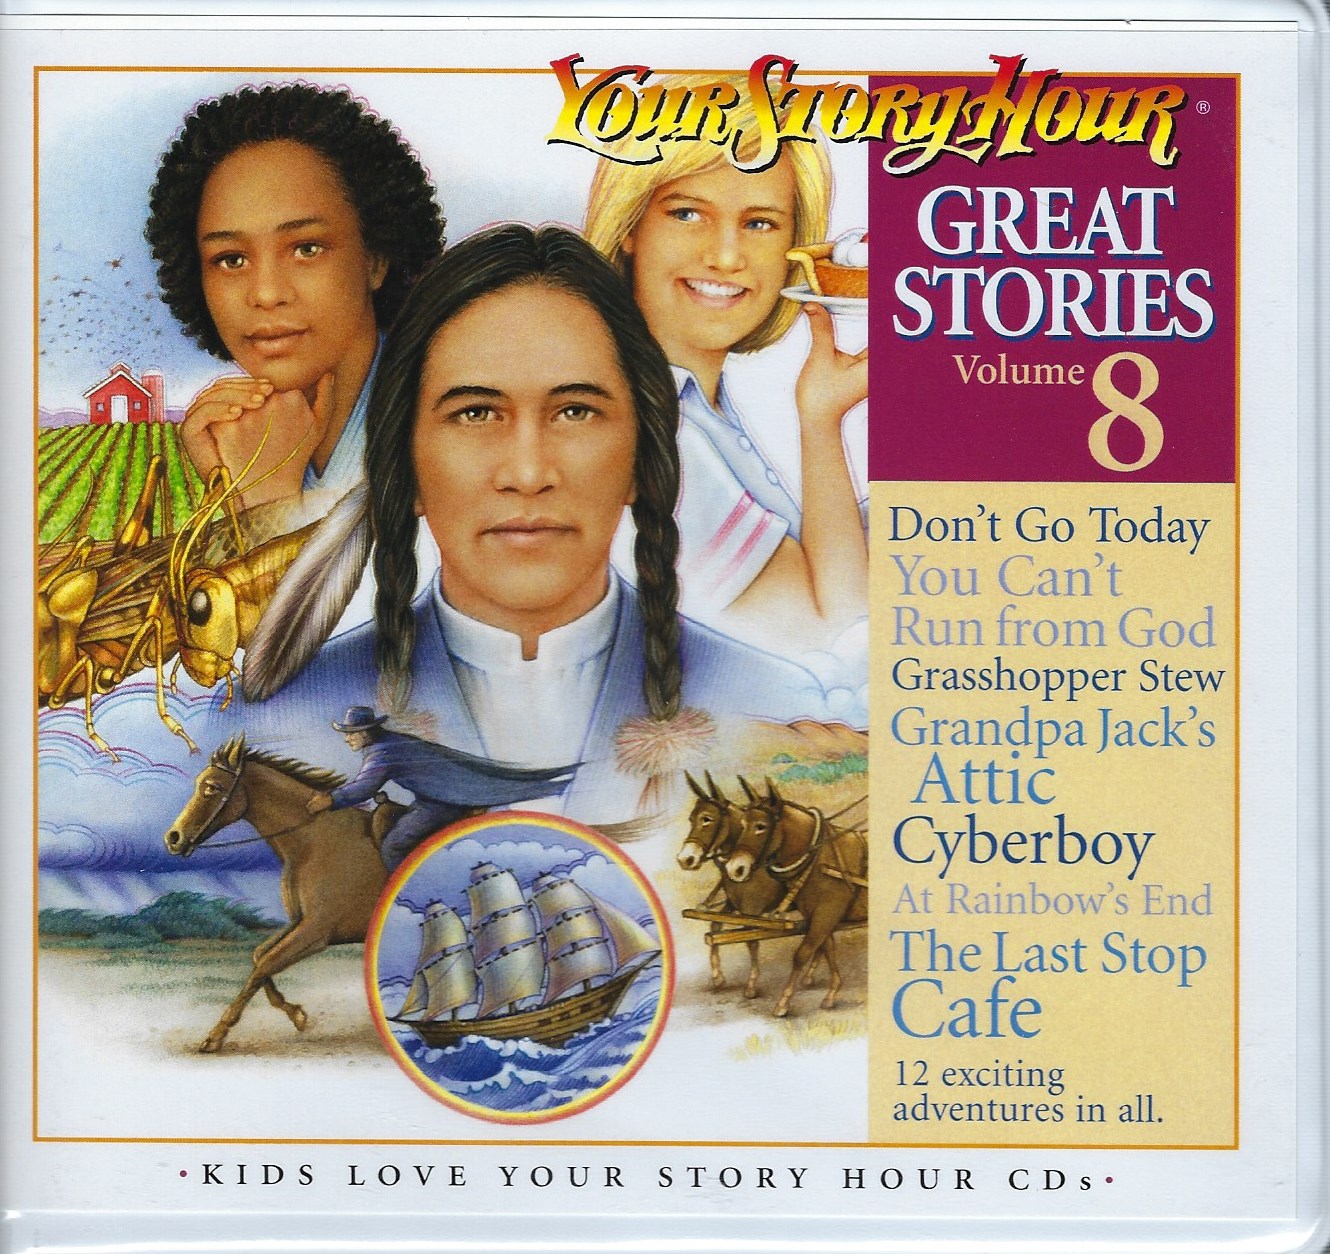 GREAT STORIES VOLUME 8 CD ALBUM Your Story Hour